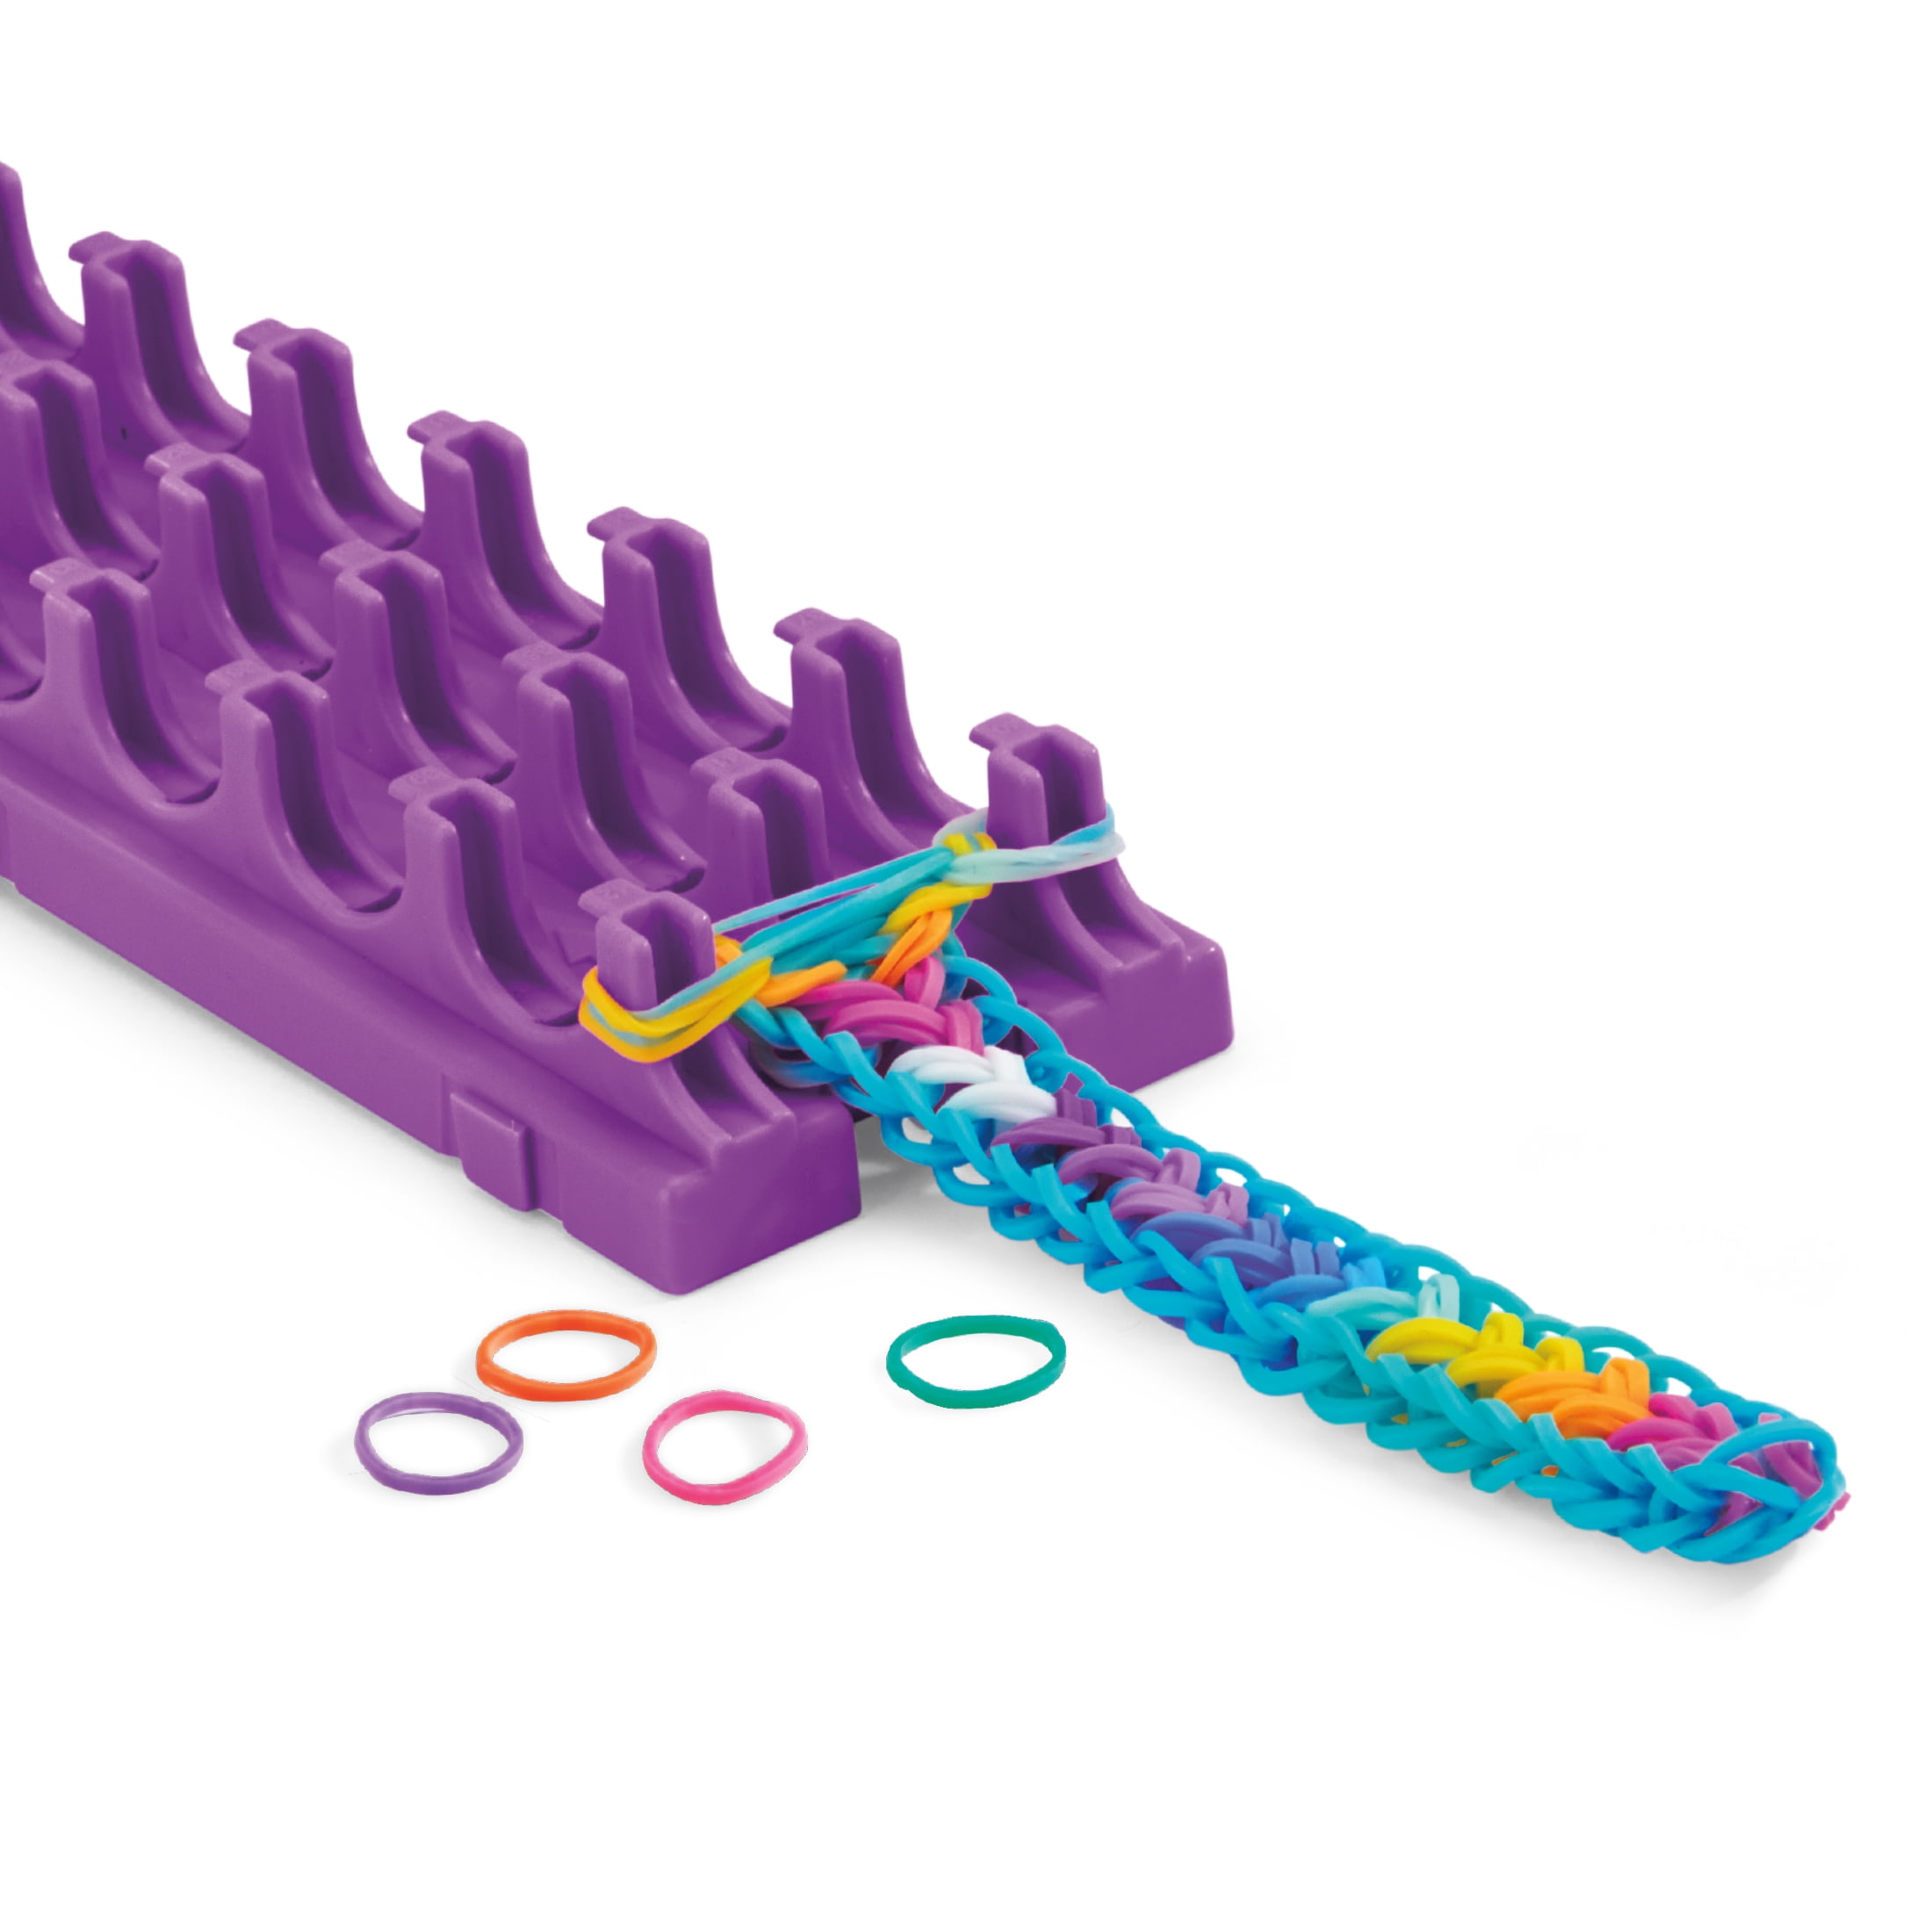 Cra-Z-Loom is now available at Walmart for $12.88 